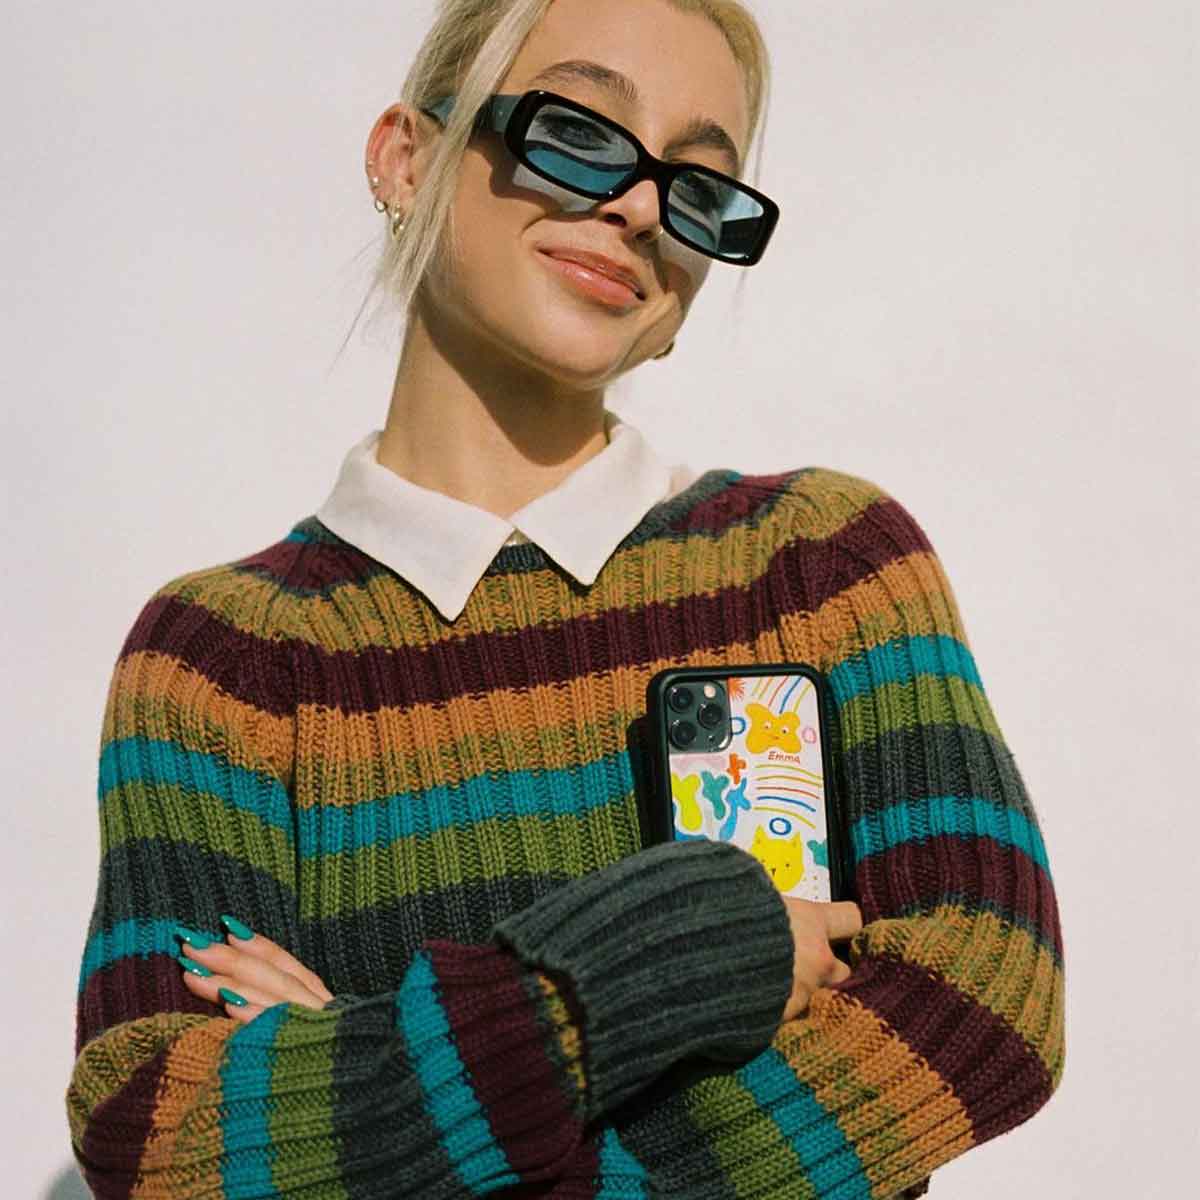 <p>One of your grandma's trends is back (in a good way)! Knit sweaters are absolutely huge this year. In fact, any oversized sweater is the go-to item for most people. That's because this year is all about being comfy and cozy. There isn't a better way to do that than a knit sweater.</p> <p>You can jump on other trends by wearing a cropped knit sweater, but we suggest going with one that you'll feel good in throughout the day. Nothing is worse than feeling uncomfortable in your own clothes. Now could also be the time to pick up that knitting kit you said you'd get to all pandemic long.</p>